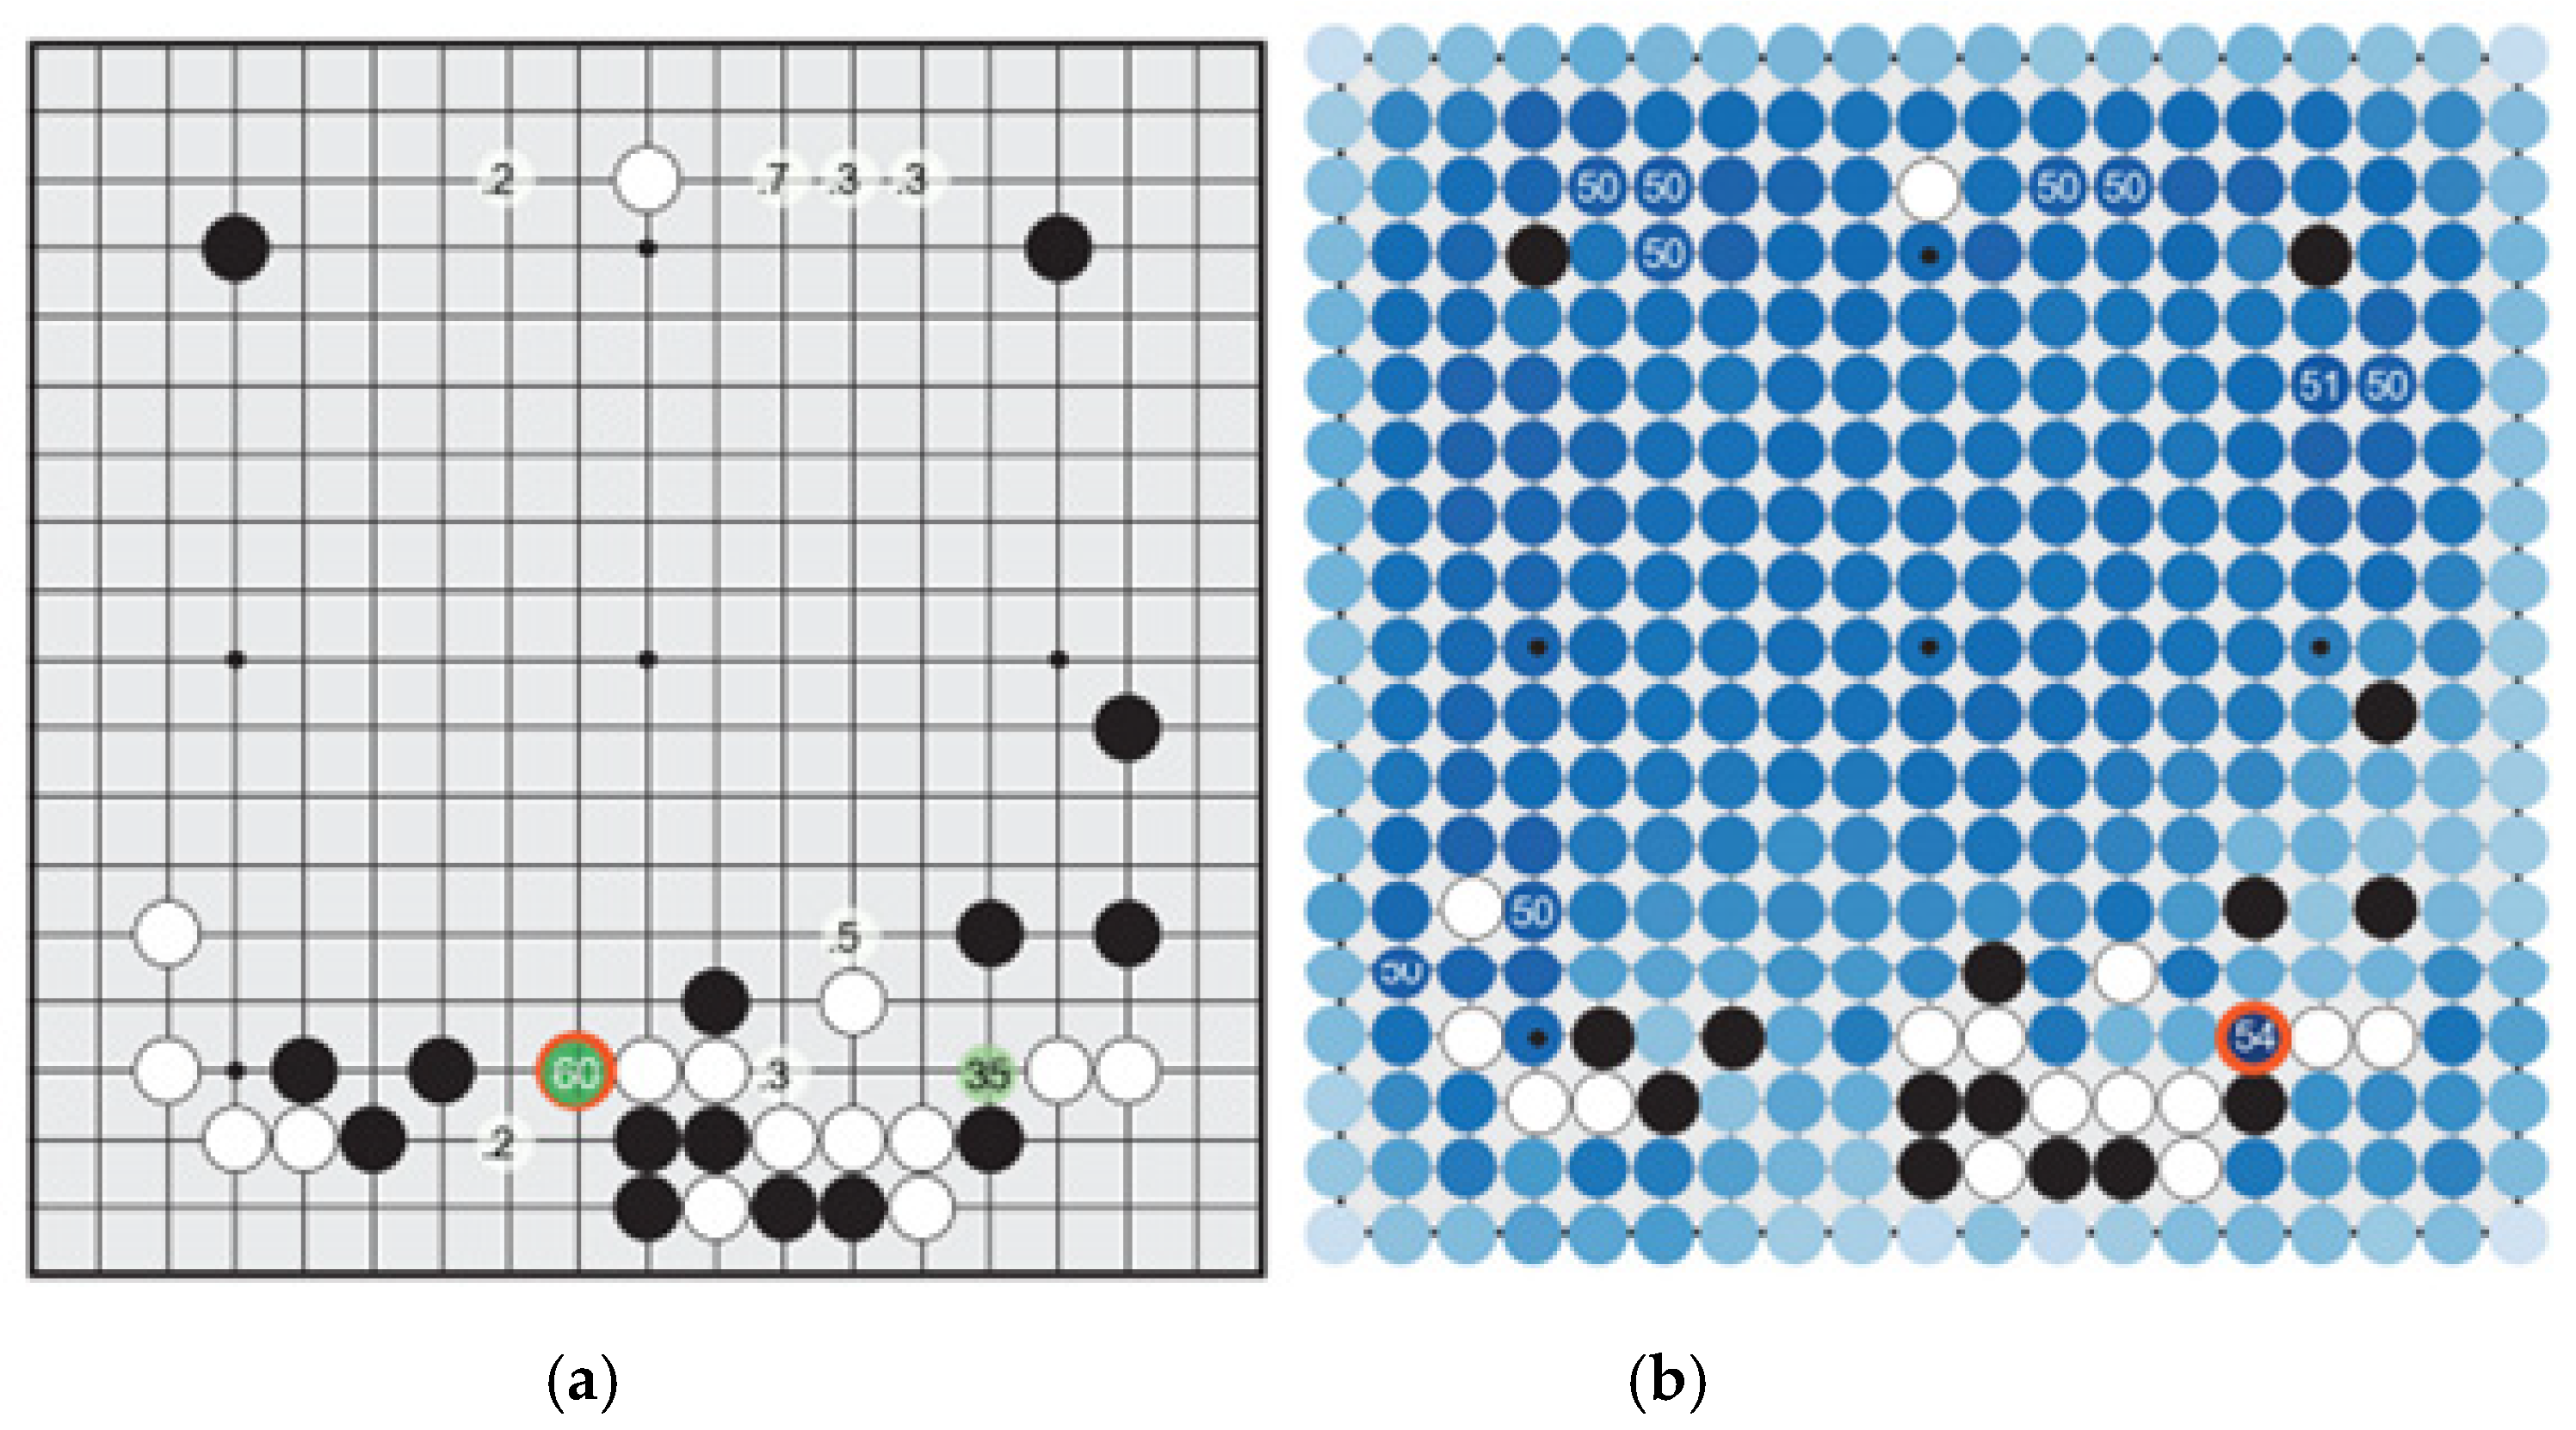 In fact, the core part of DeepMind's go AI 'AlphaGo' and the